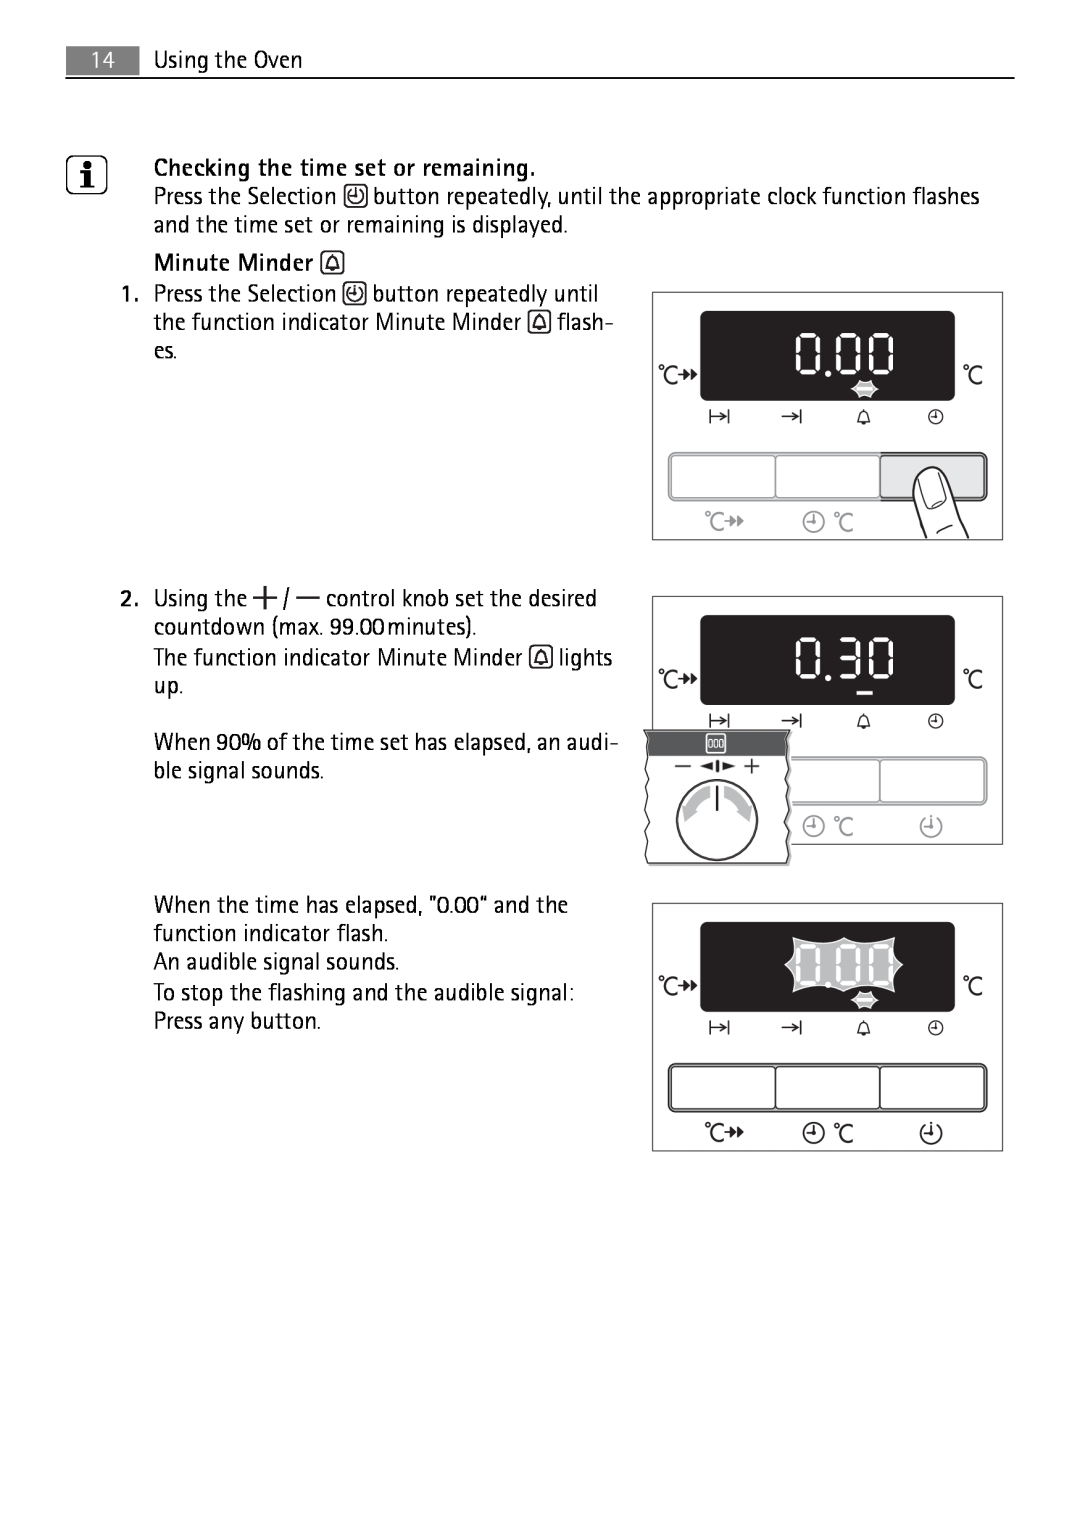 Electrolux B3741-5 user manual Checking the time set or remaining, Using the Oven, Minute Minder 